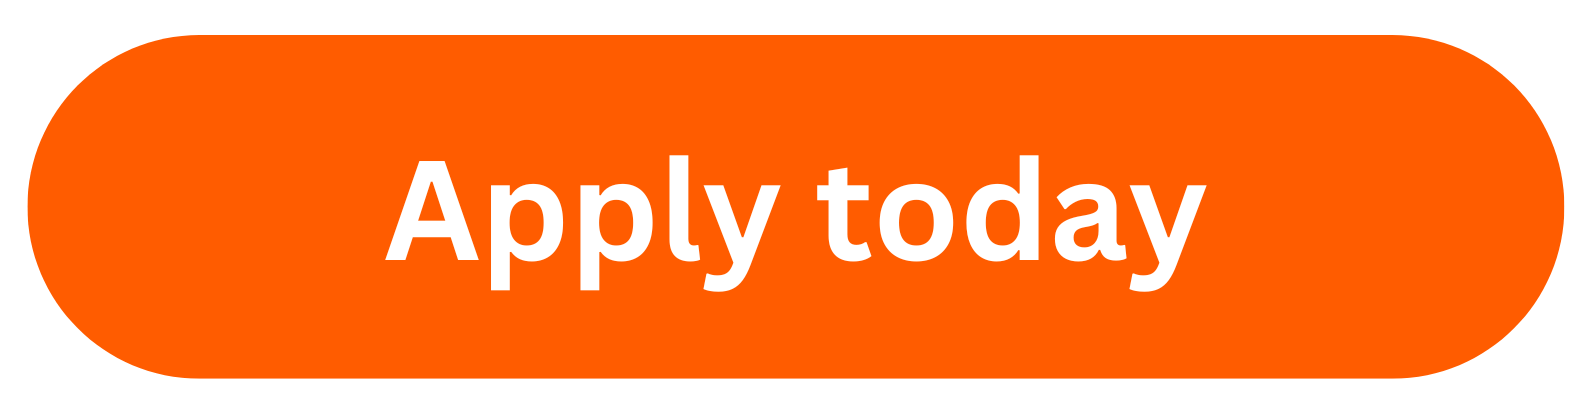 Apply today INORMS button